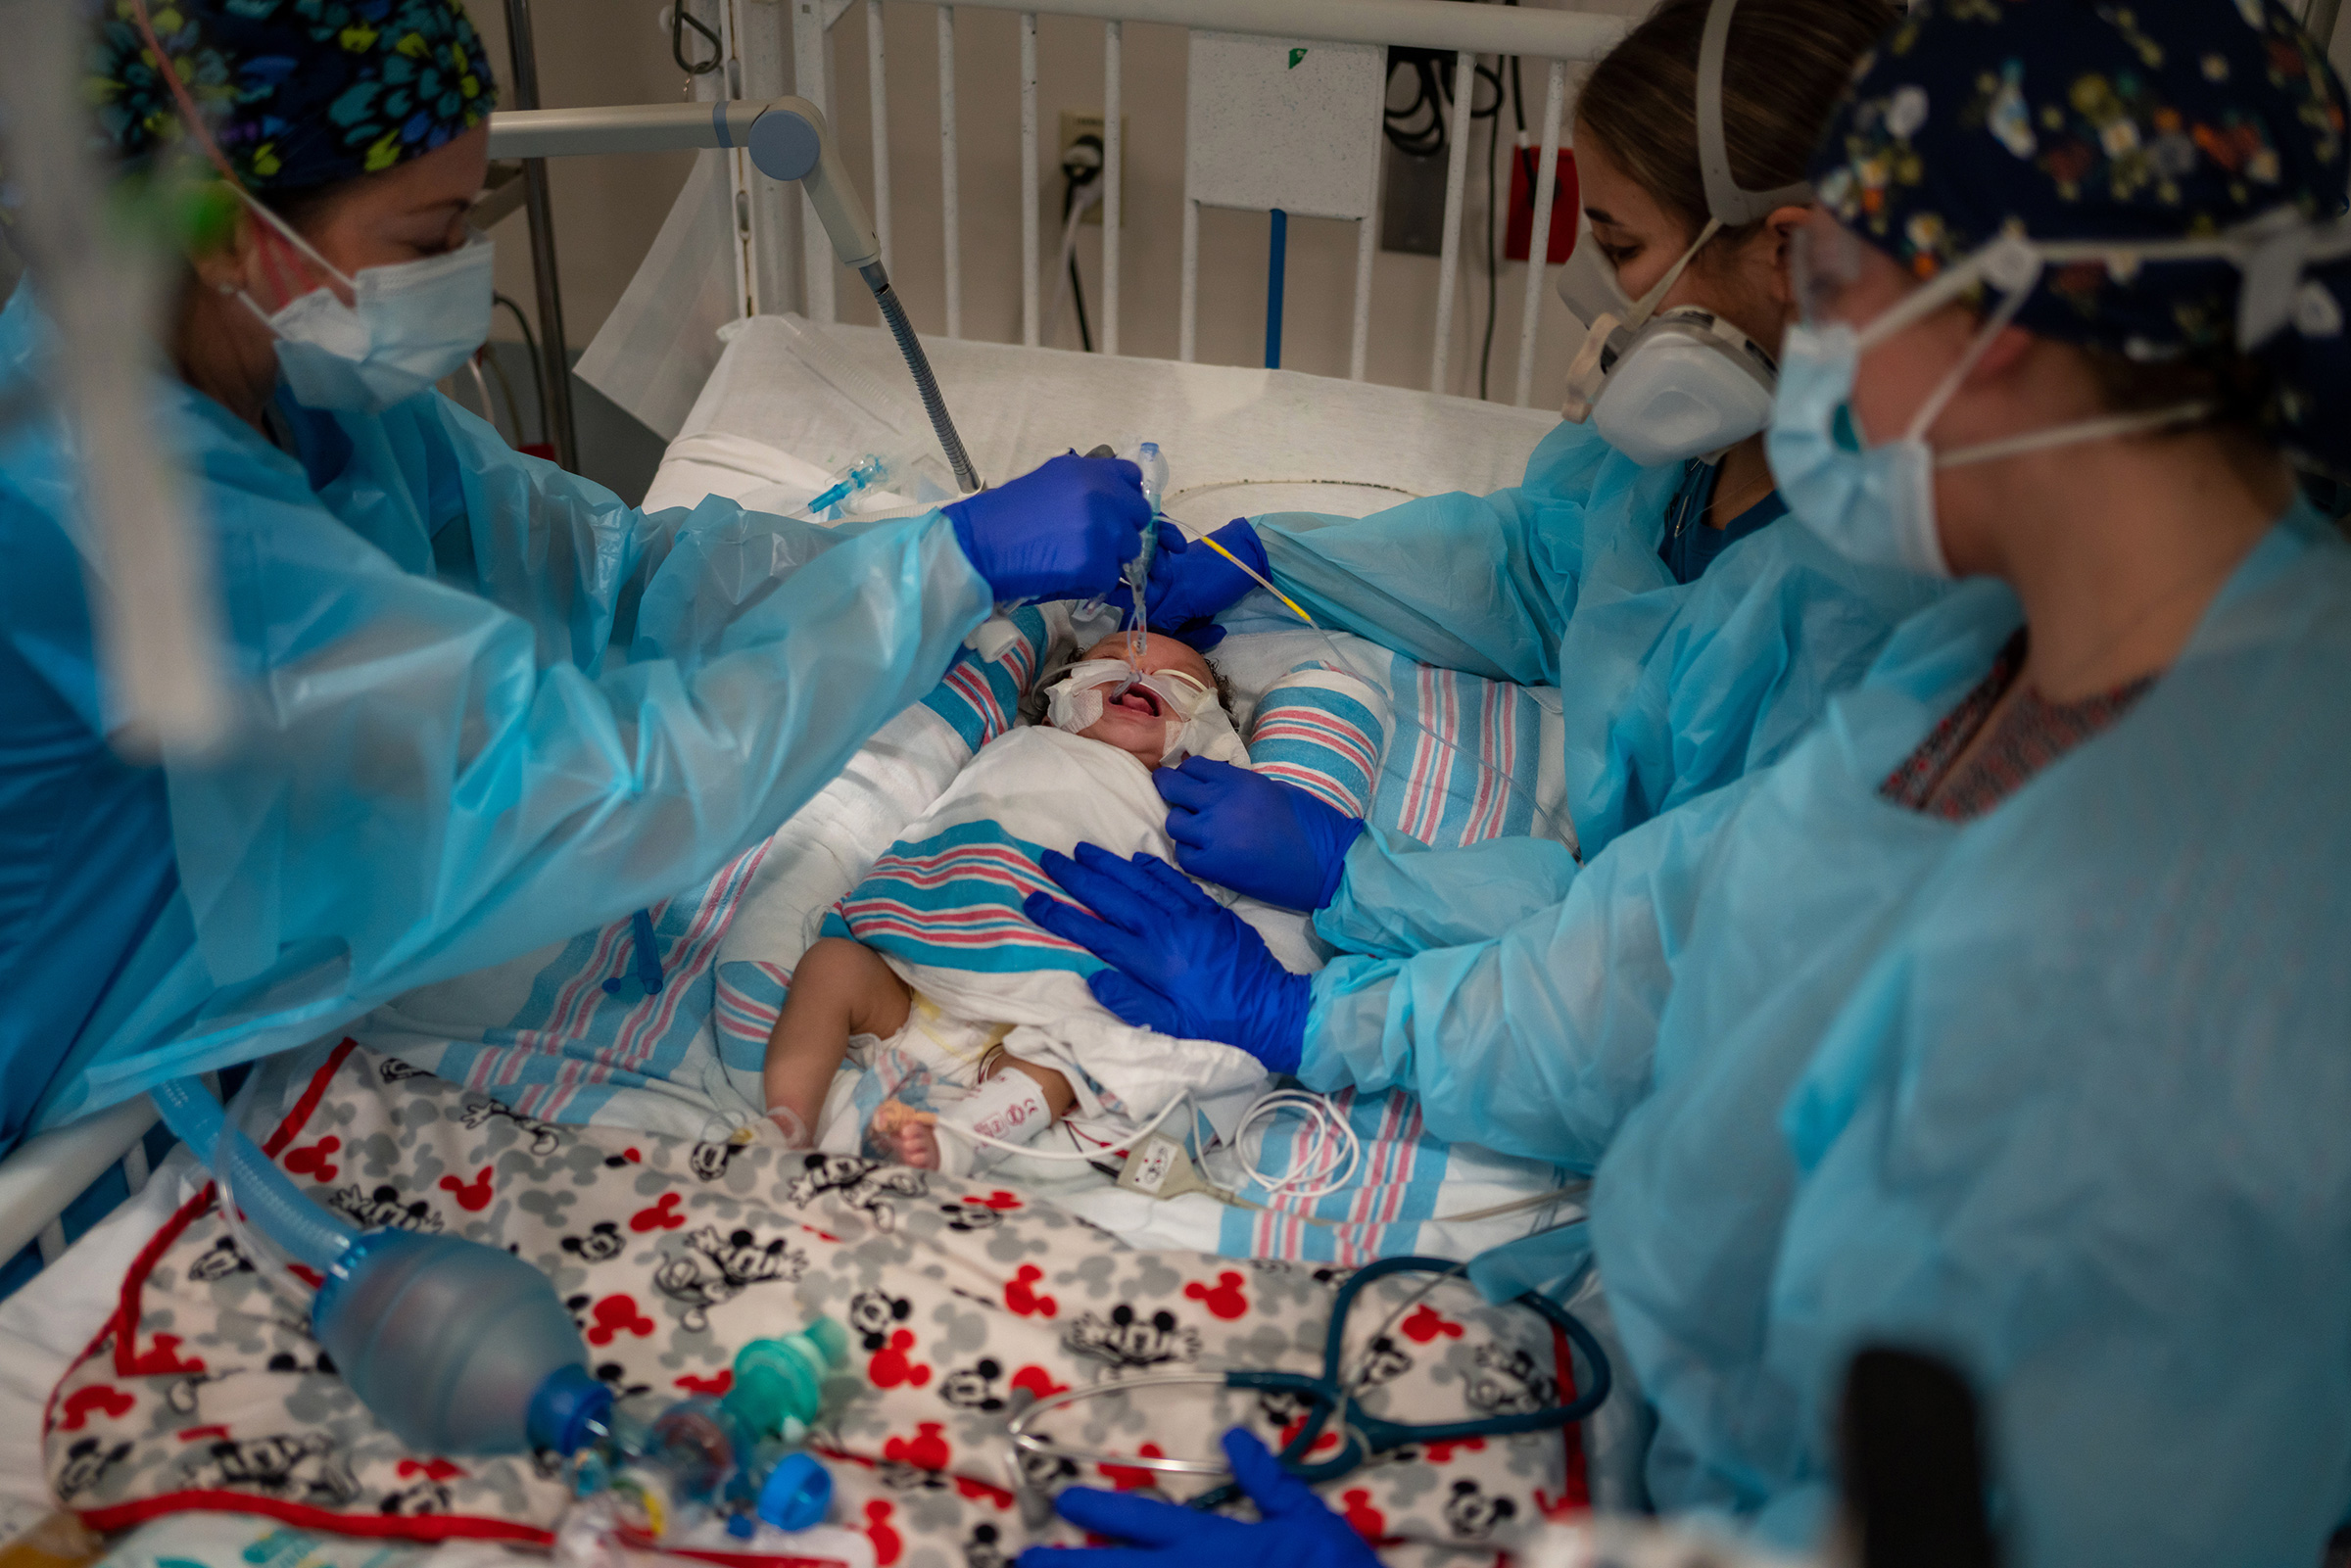 Two-month-old Carvase Perrilloux undergoes an extubation procedure, taking him off of the ventilator that has been keeping him alive. (Kathleen Flynn for TIME)